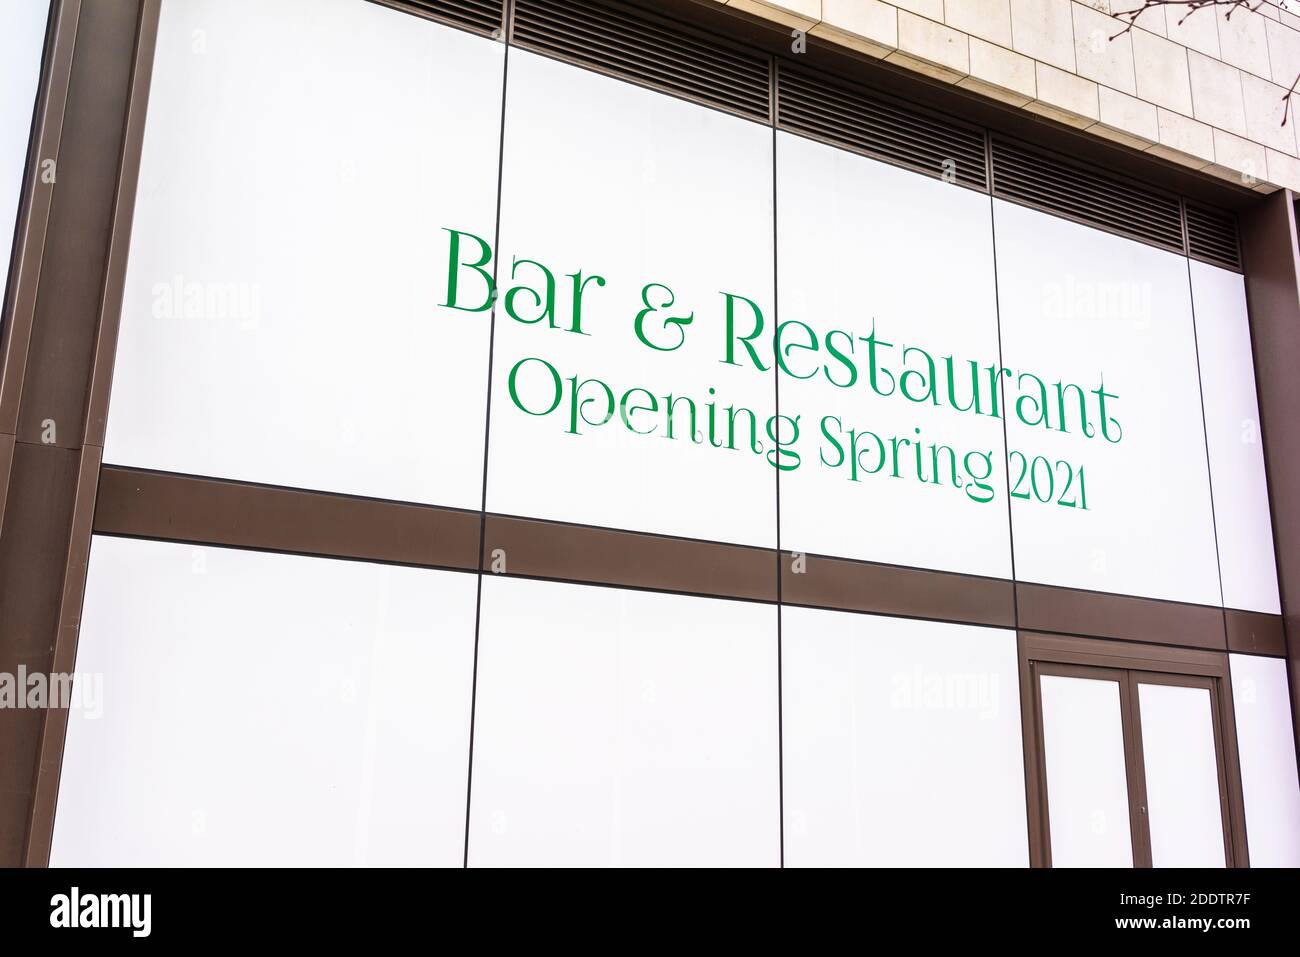 A sign for the opening of a new Bar & Restaurant in Spring 2021 in the city centre of Southampton, England, UK Stock Photo